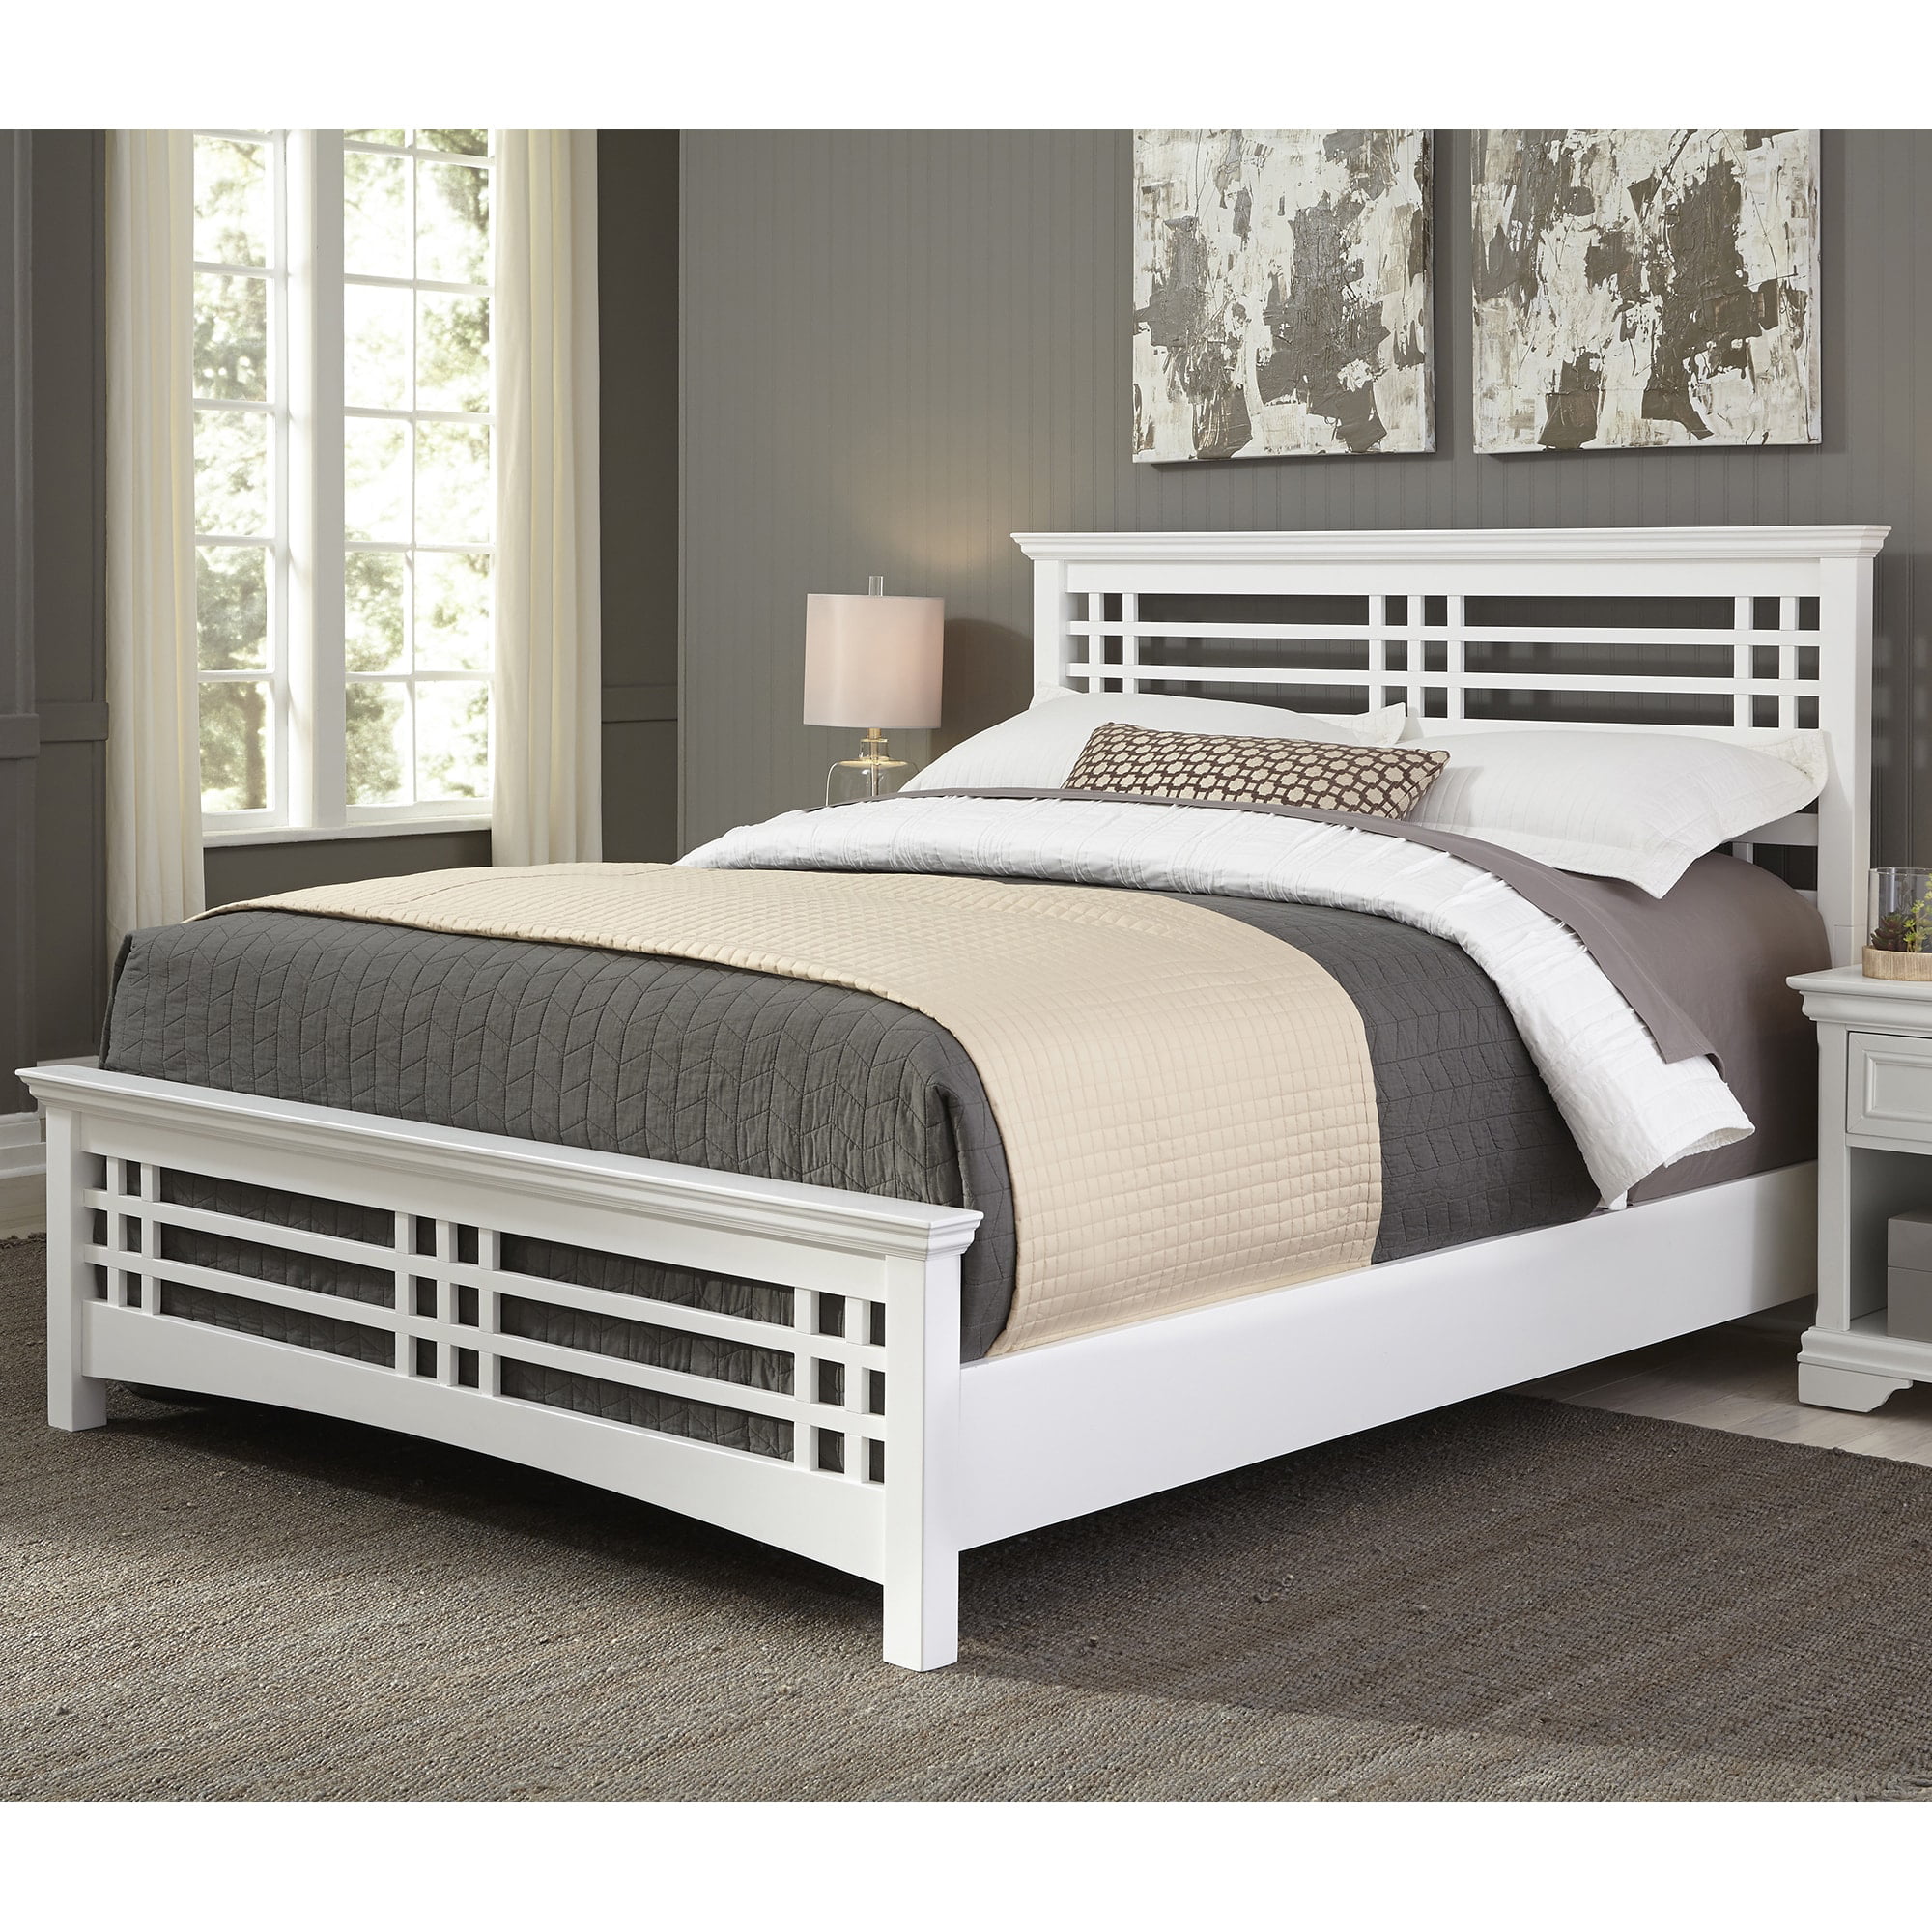 Fashion Bed Group Avery Complete, Mission Style King Size Bed